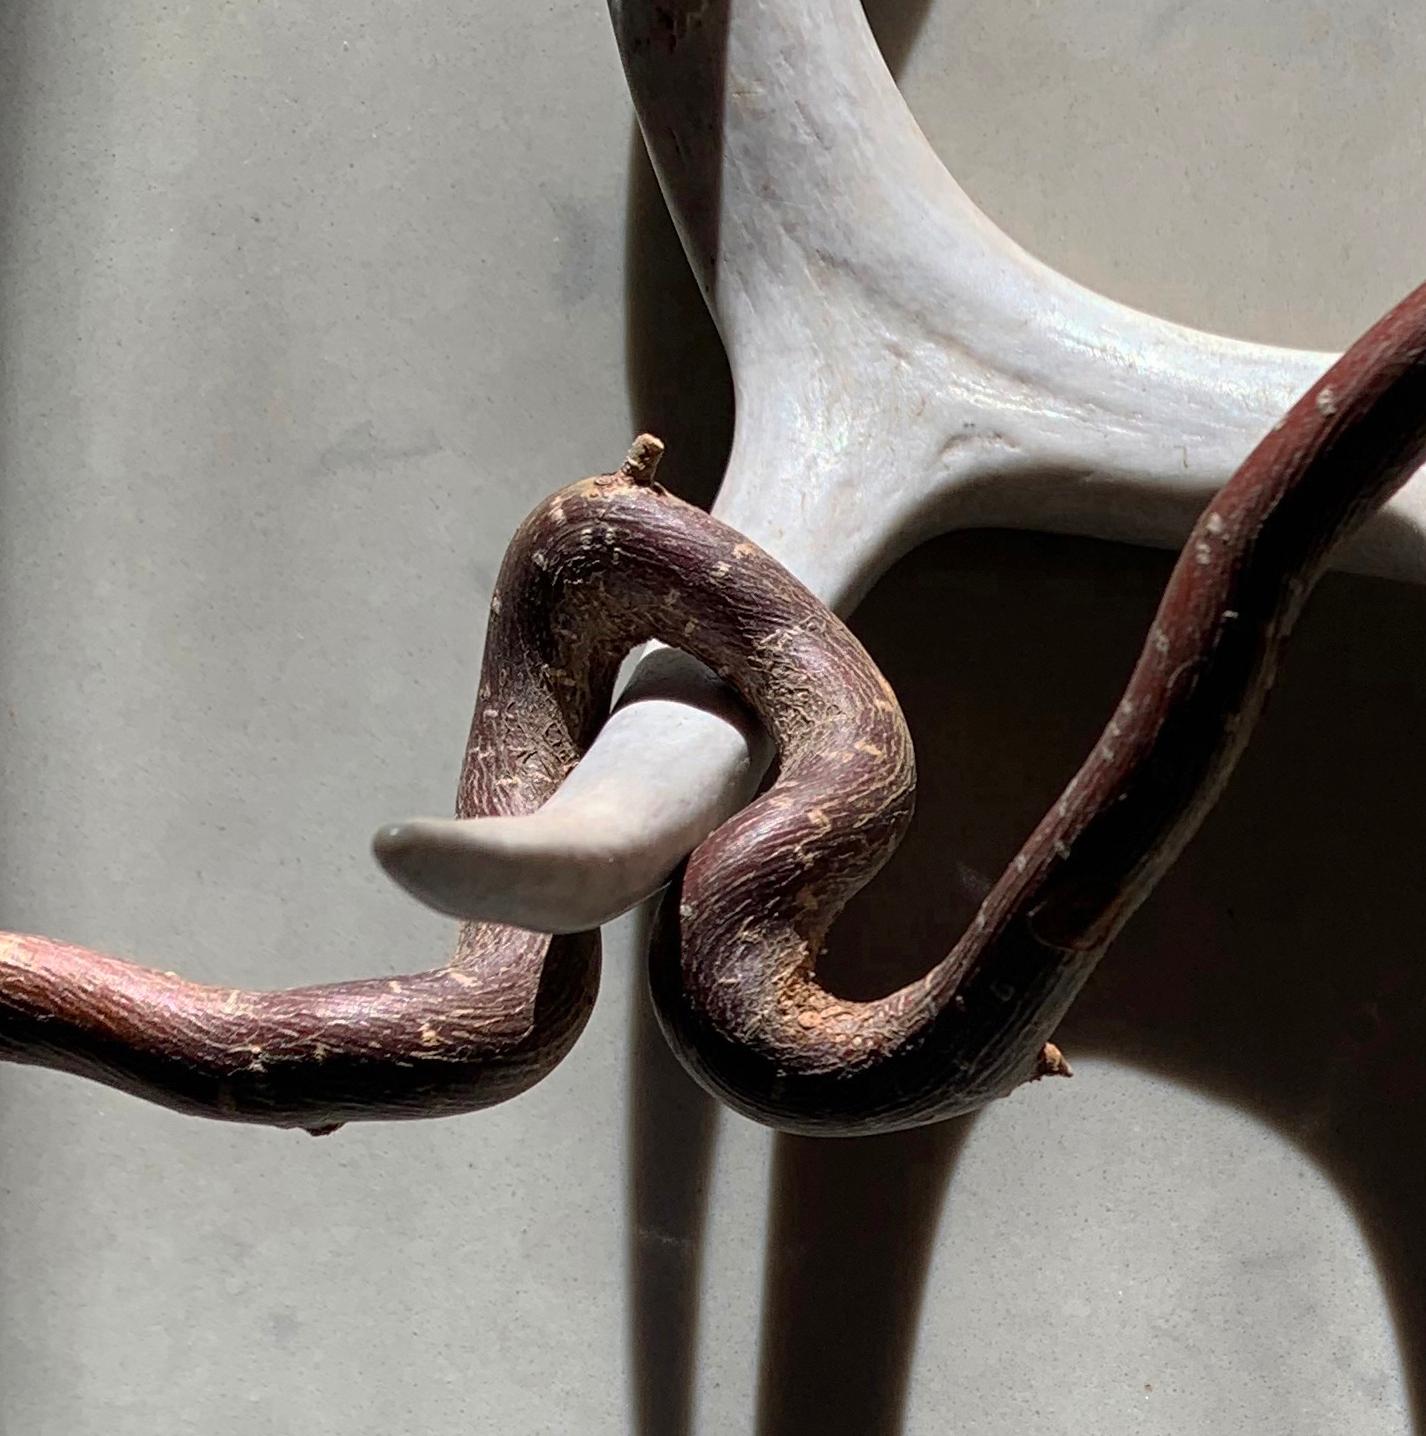 Untitled (2159): still life photograph with antler and abstract shadow patterns - Photograph by Paul Cava